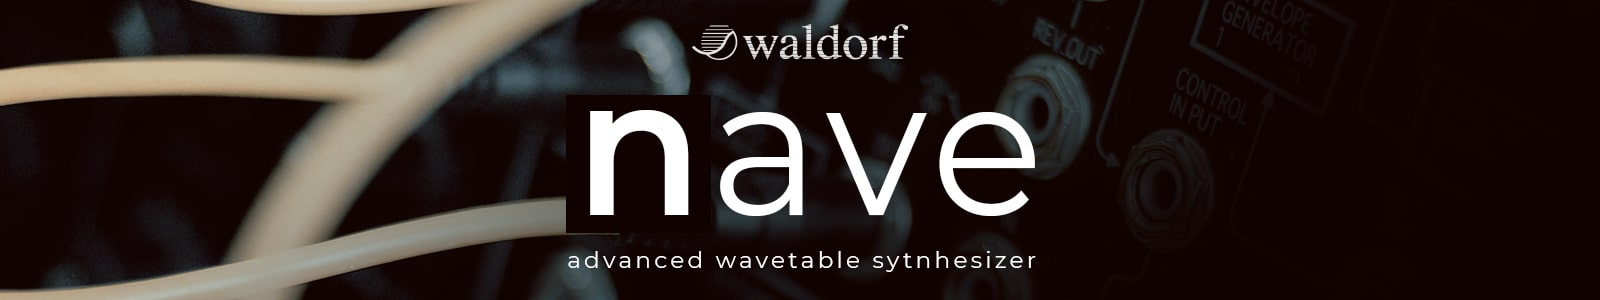 nave by waldorf